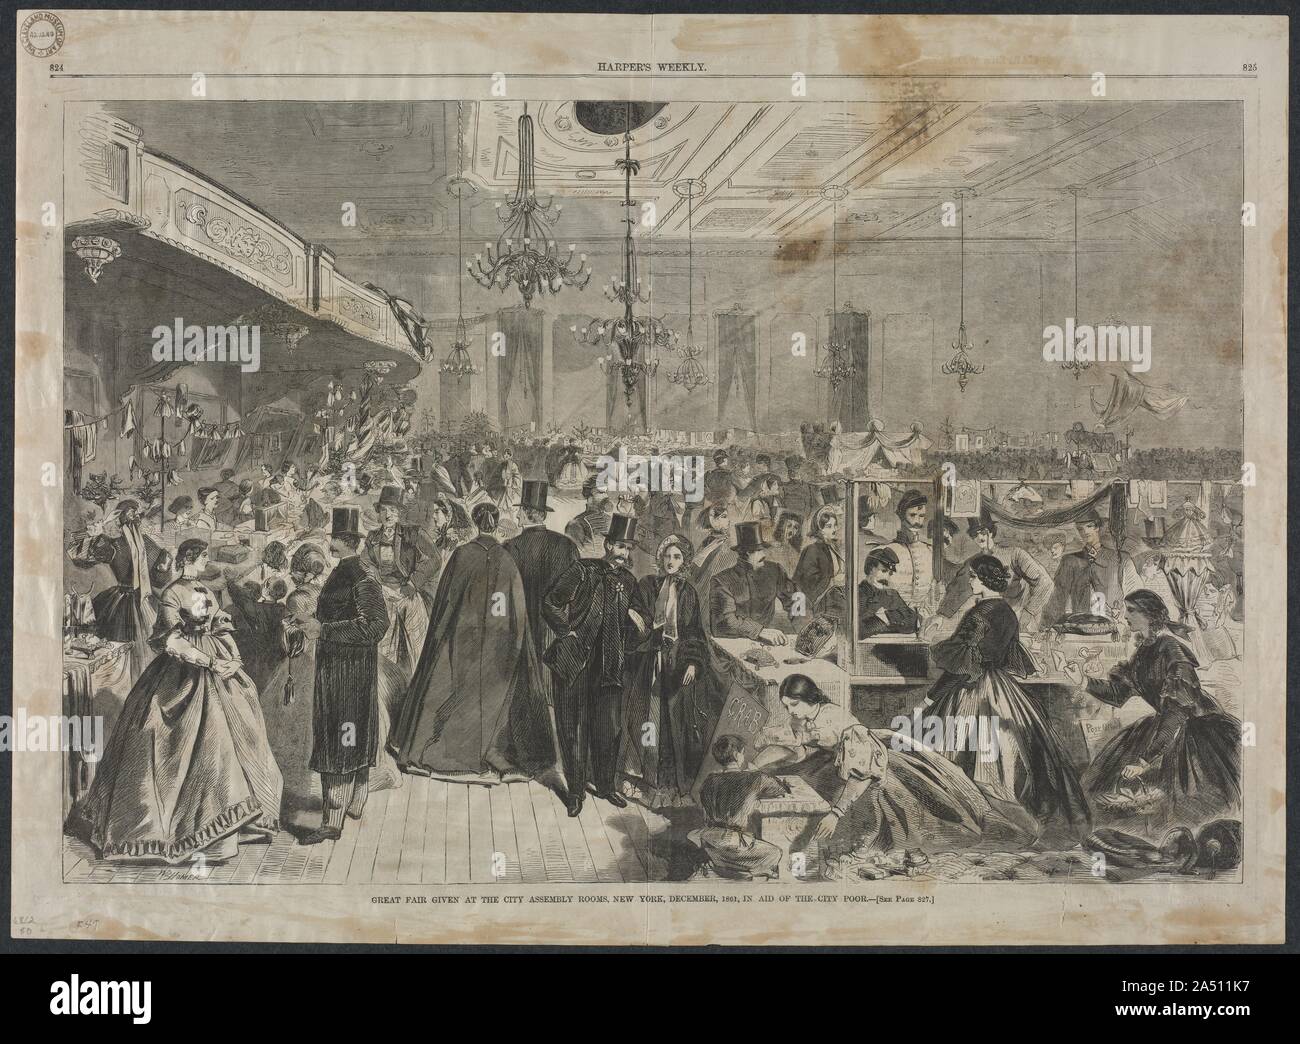 Great Fair Given at the City Assembly Rooms, New York, December, 1861, in Aid of the City Poor, 1861. Stock Photo